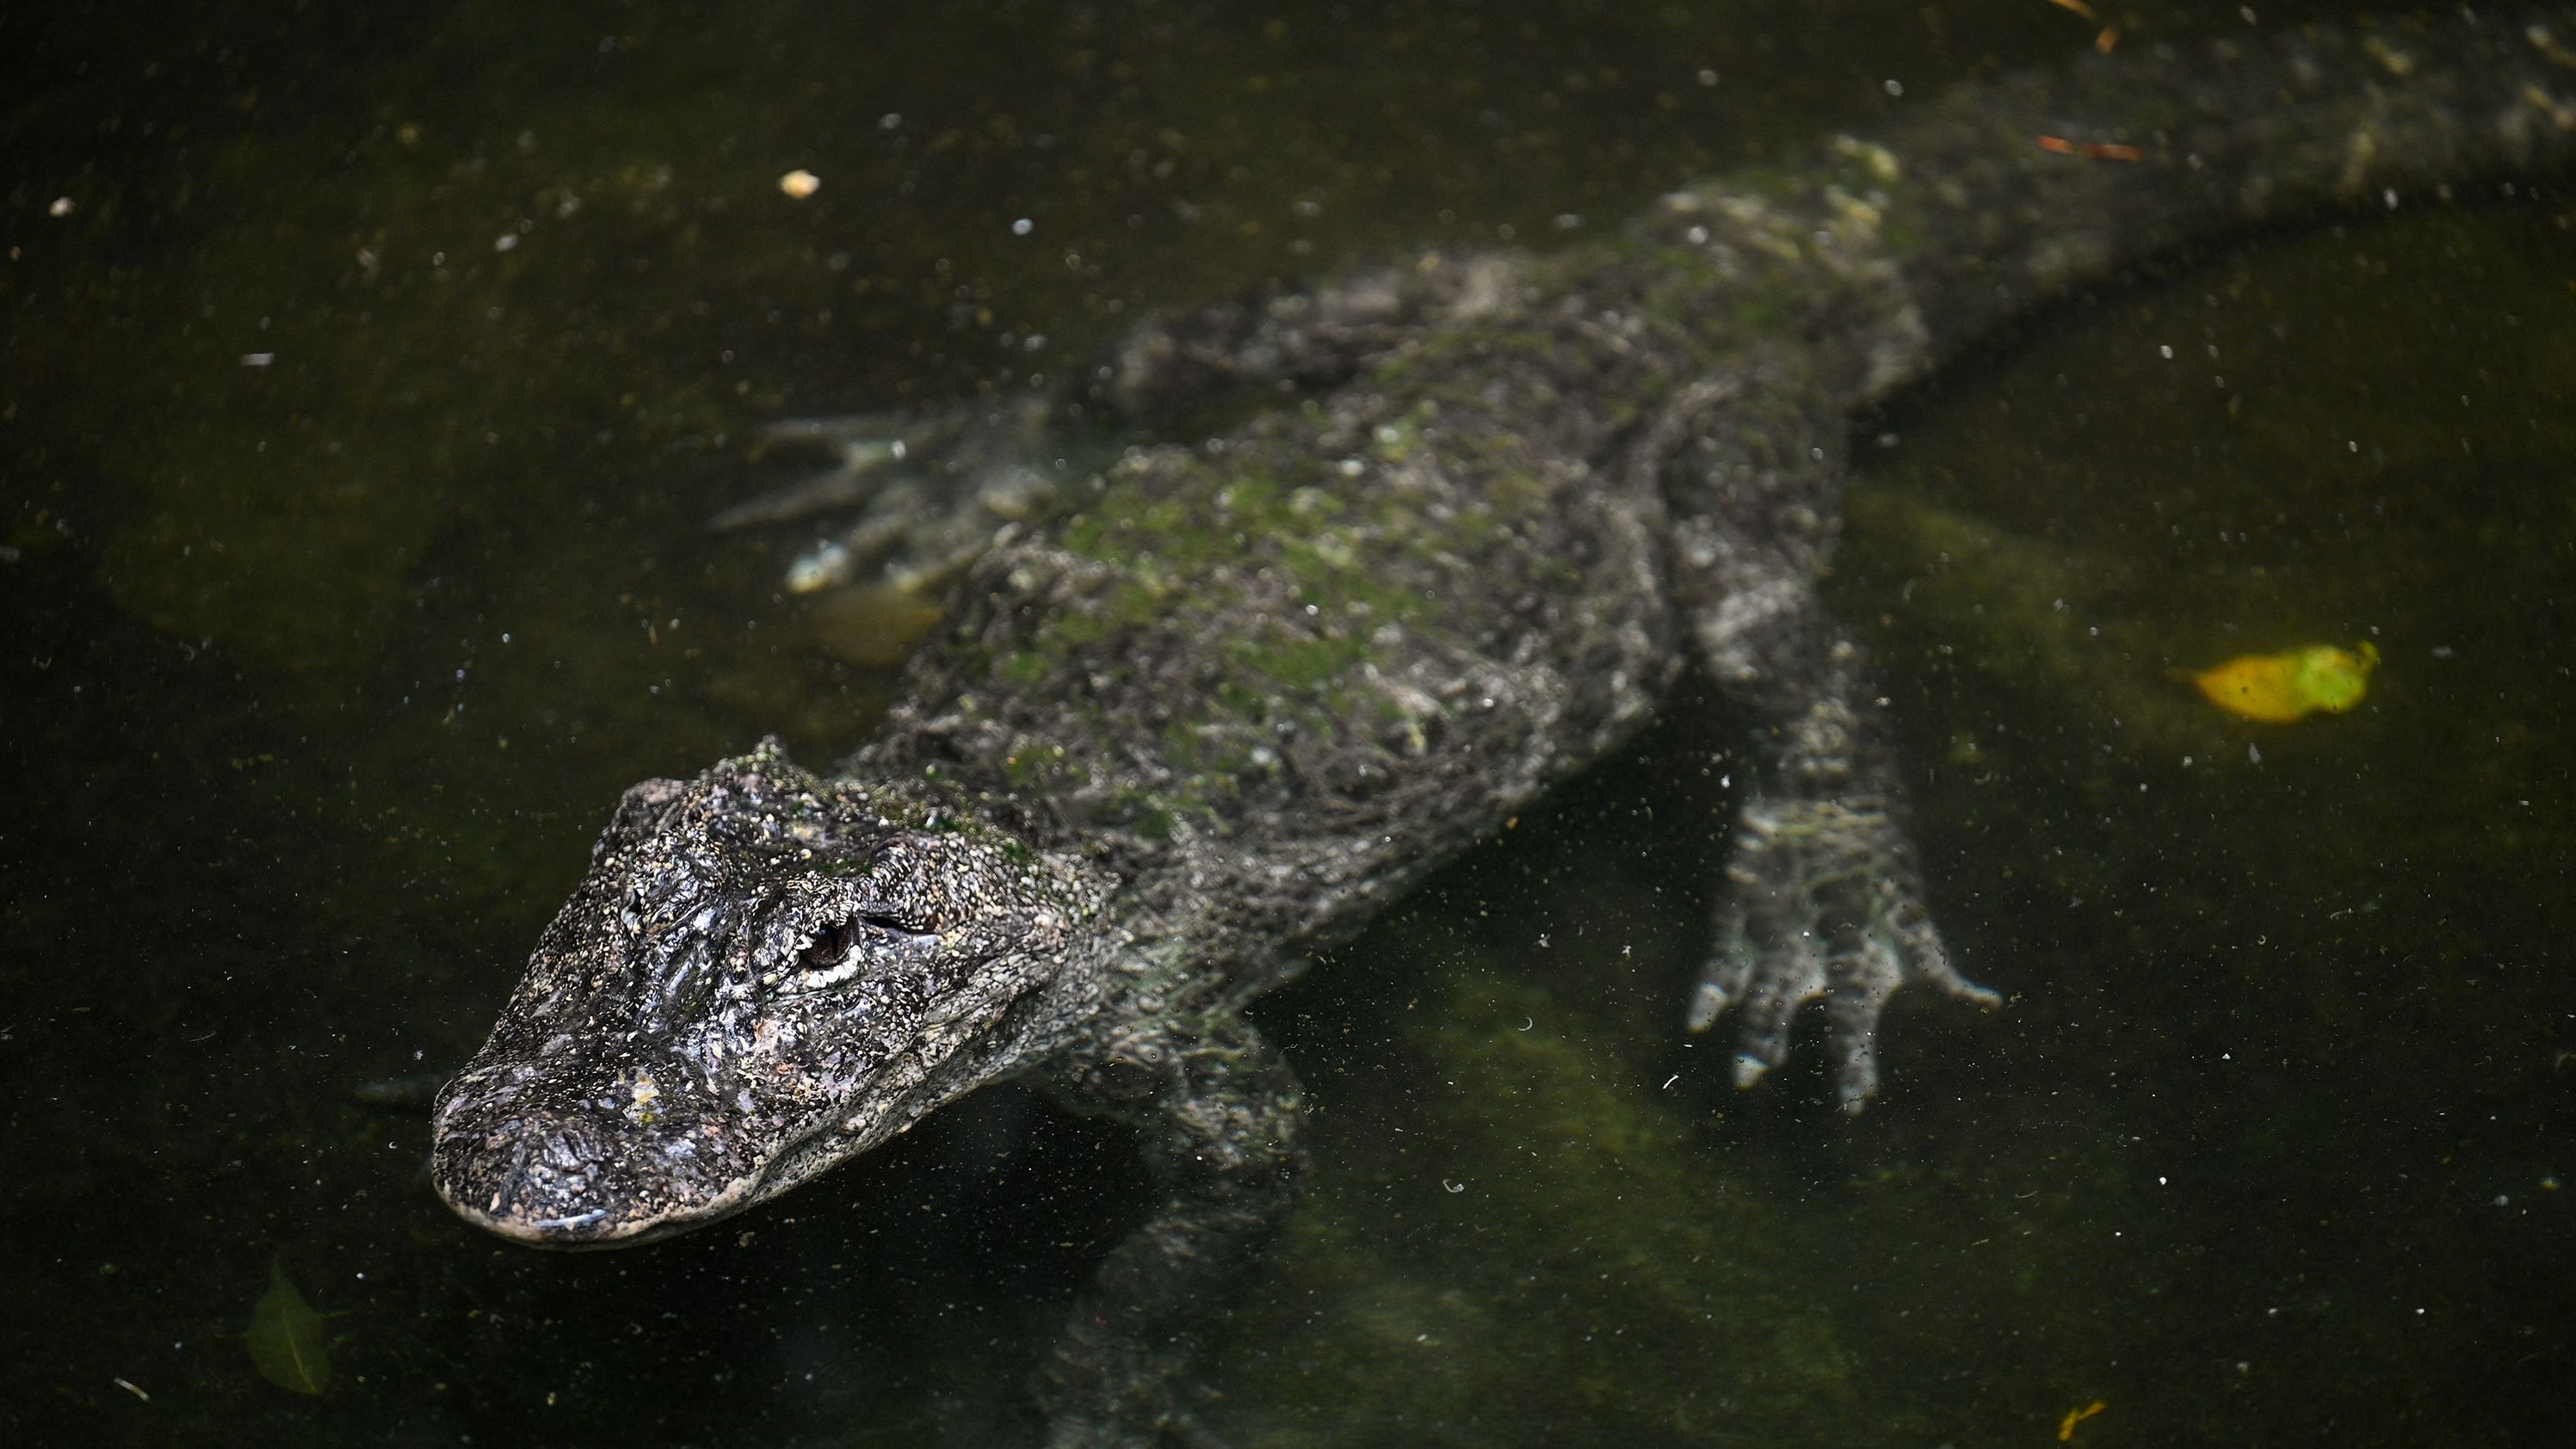 A Chinese alligator at a zoo in Shanghai. Native to the Yangtze, their numbers in the wild are drastically declining and could worsen as the river shrinks and dries up.